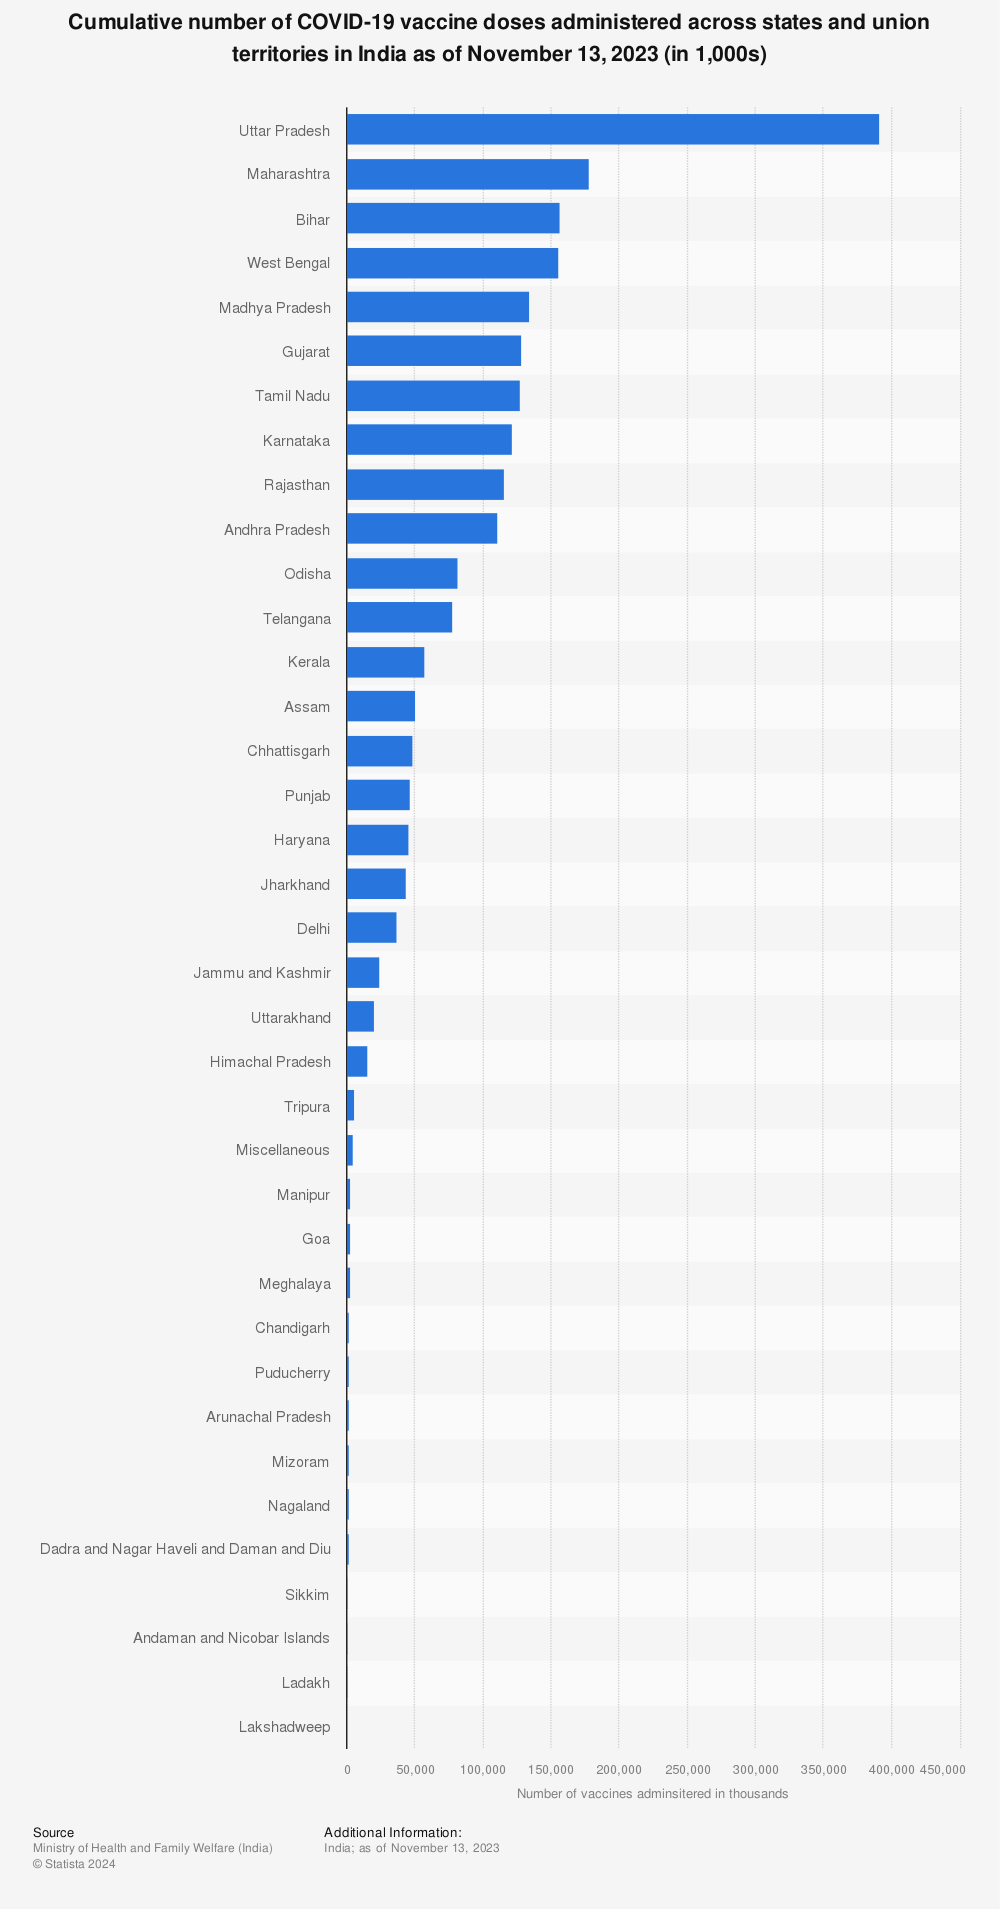 Statistic: Cumulative number of COVID-19 vaccine doses administered across states and union territories in India as of March 30, 2023 (in 1,000s) | Statista